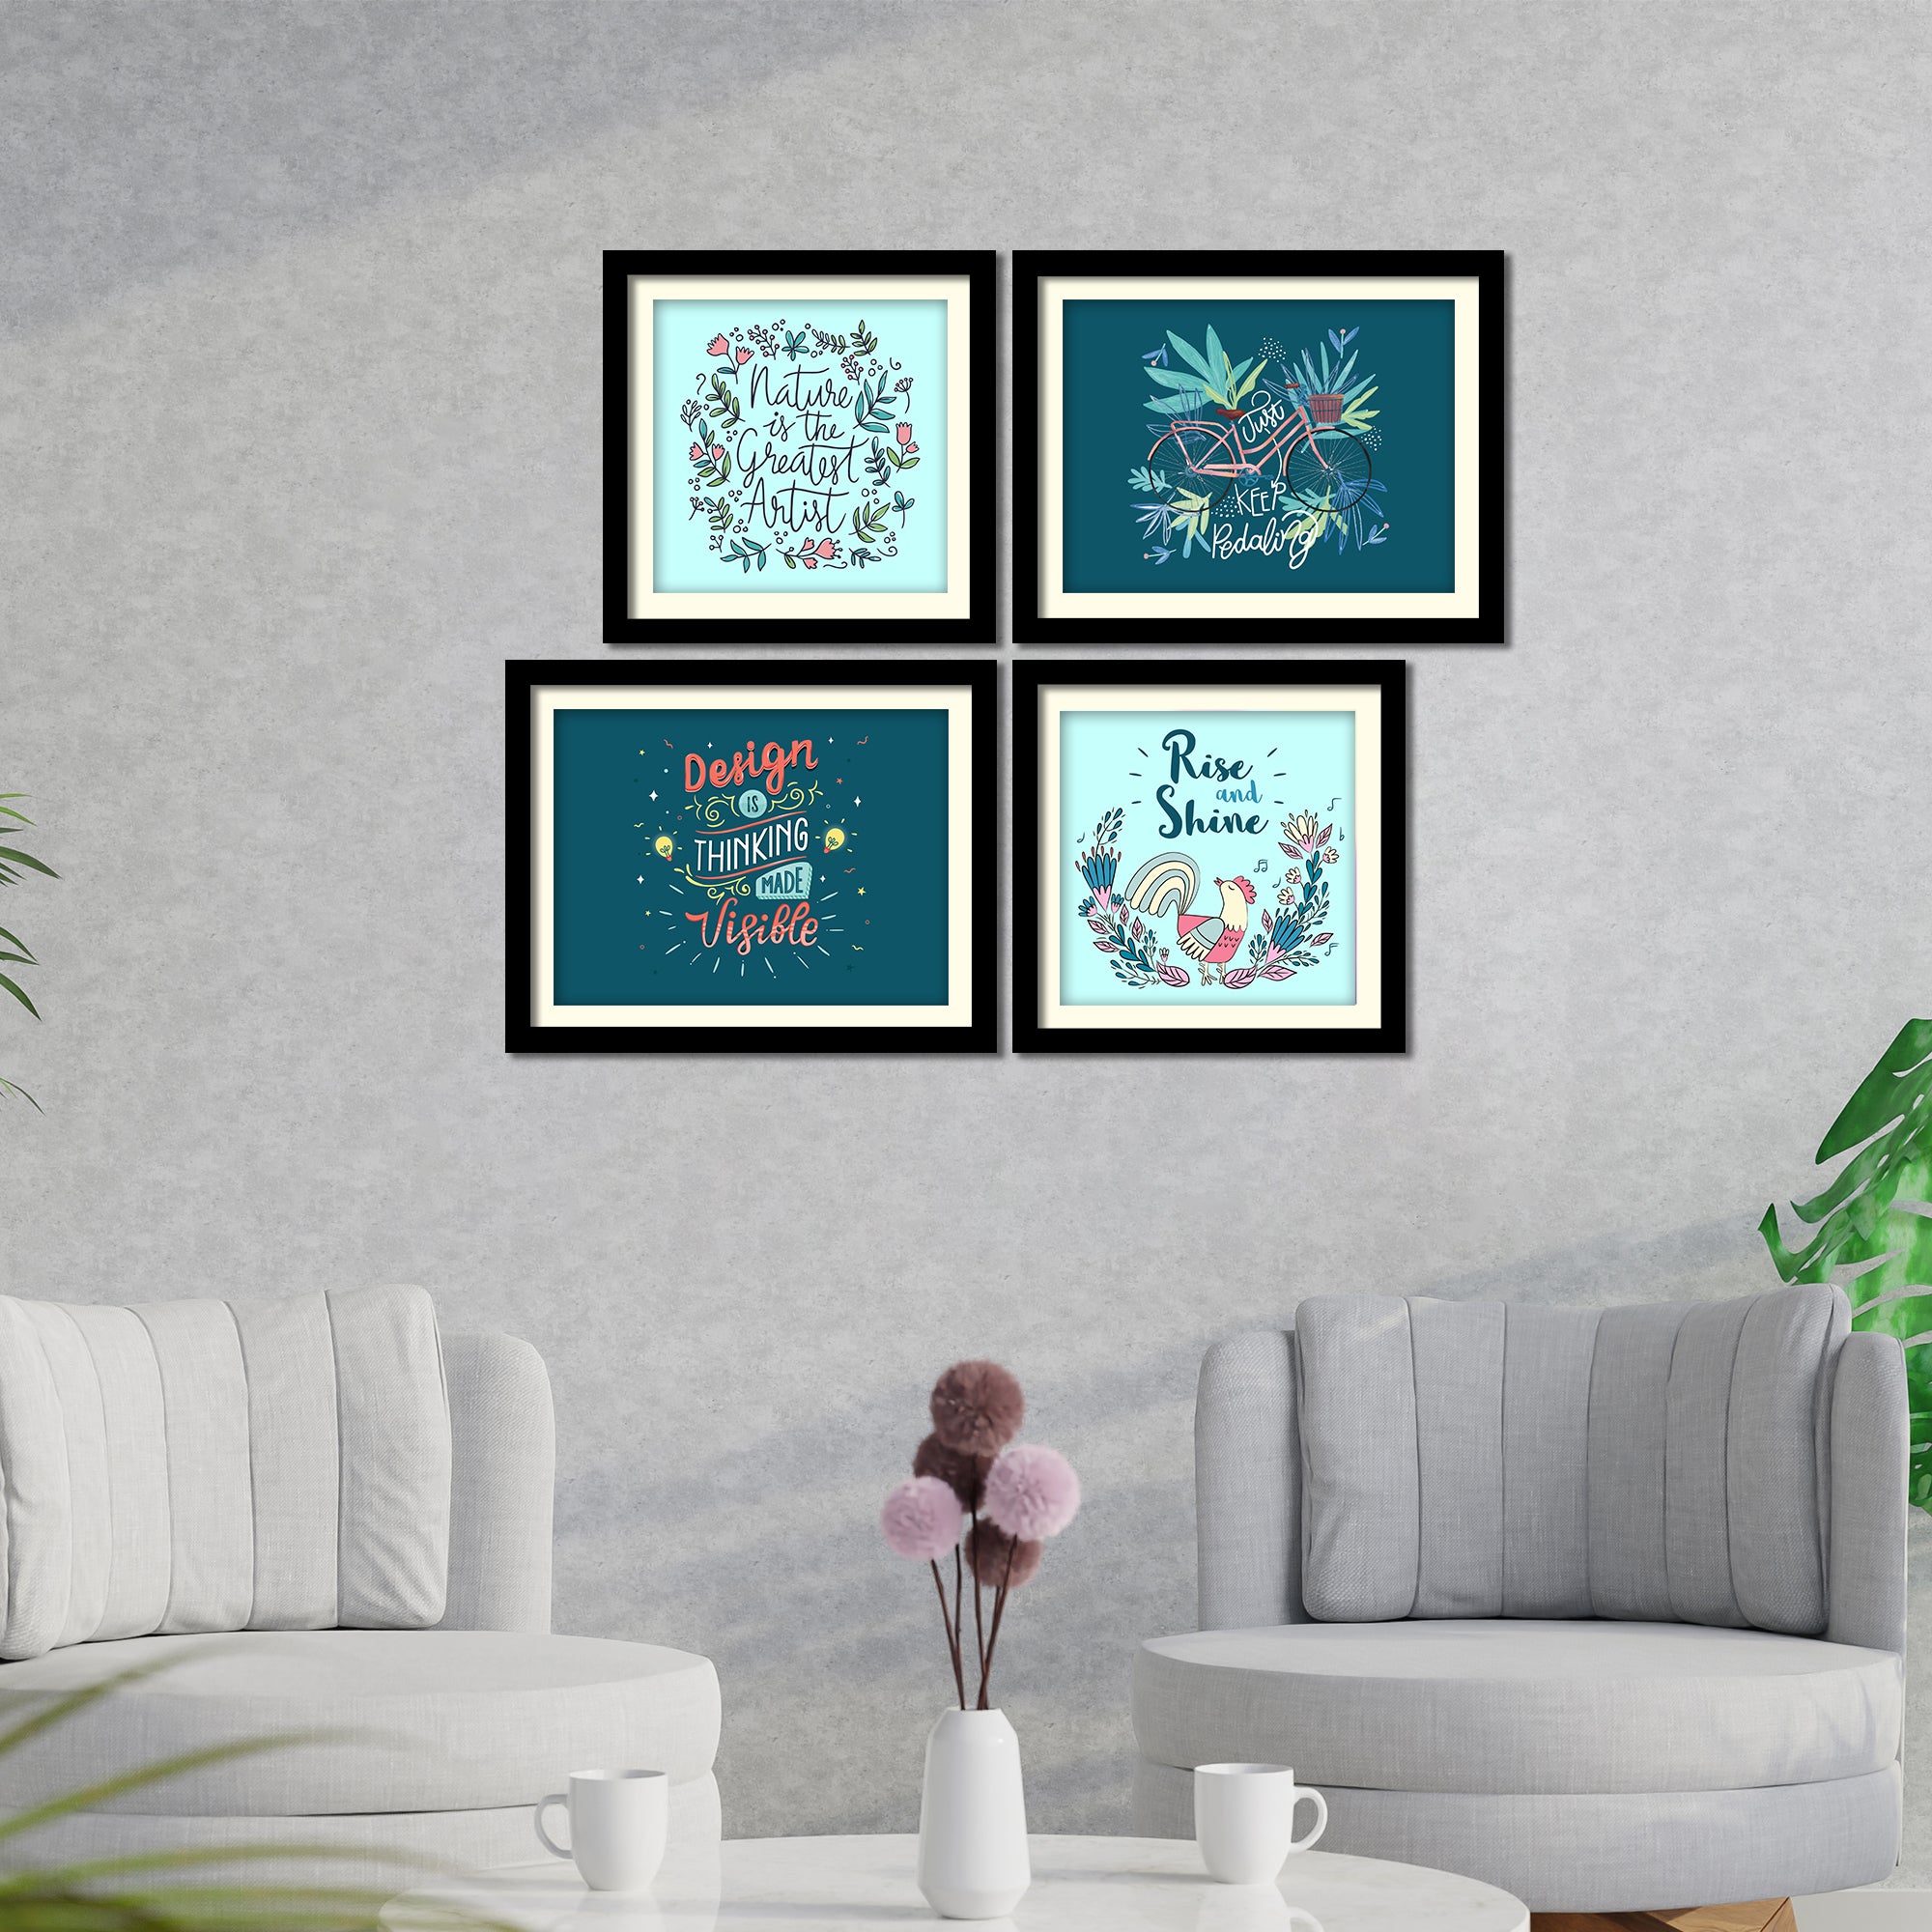 Rise and Shine Quotes Decorative Wall Hanging Frame Set of Four